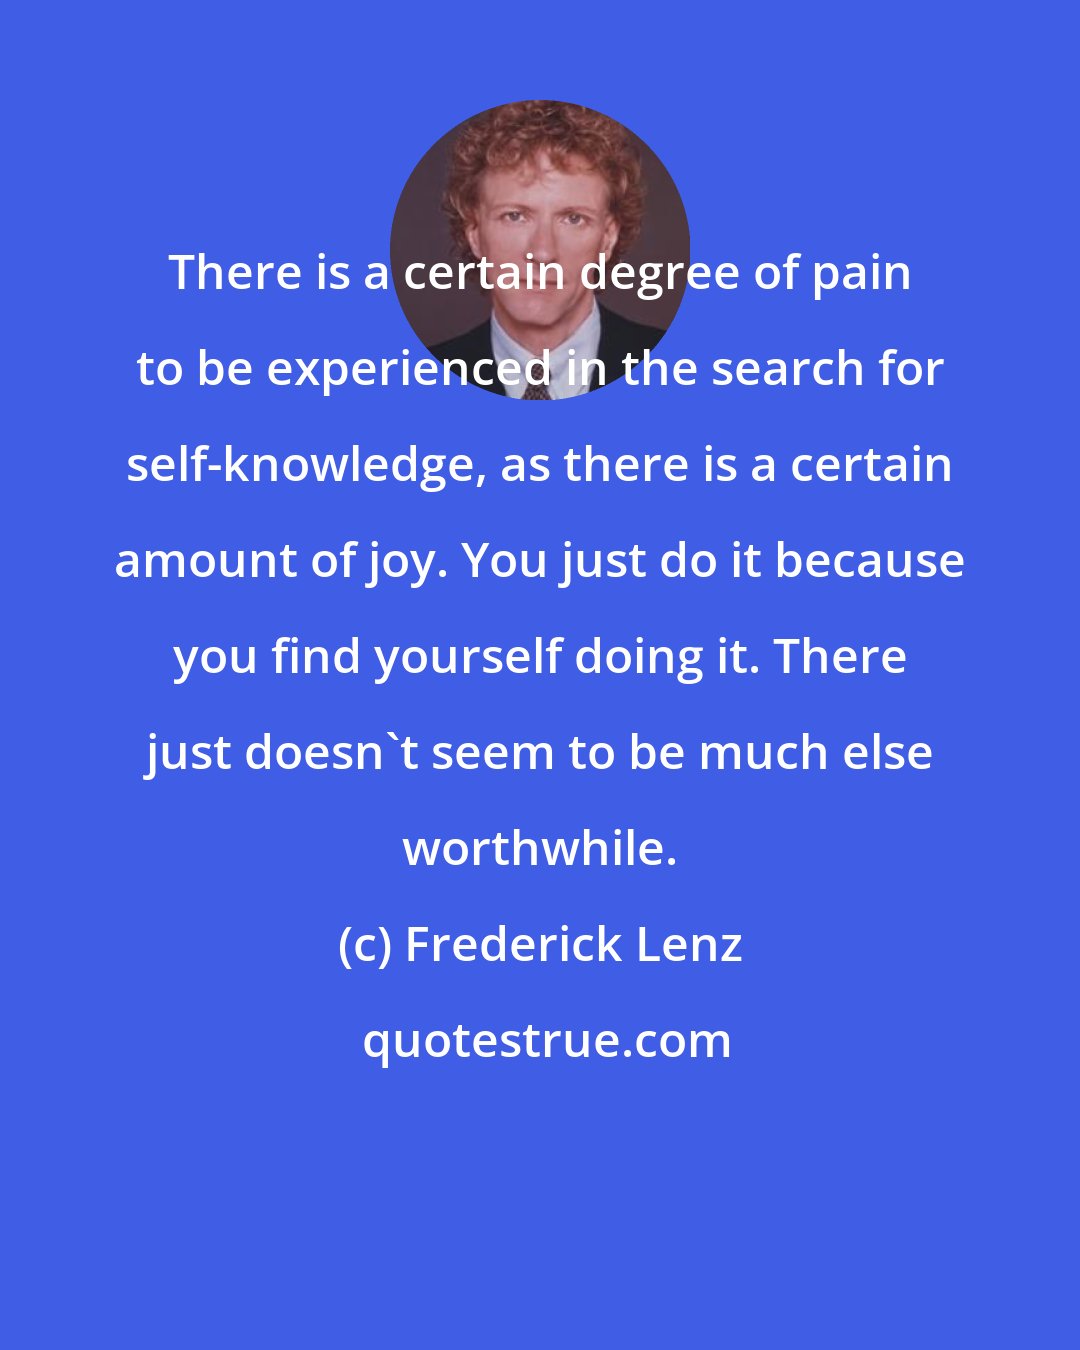 Frederick Lenz: There is a certain degree of pain to be experienced in the search for self-knowledge, as there is a certain amount of joy. You just do it because you find yourself doing it. There just doesn't seem to be much else worthwhile.